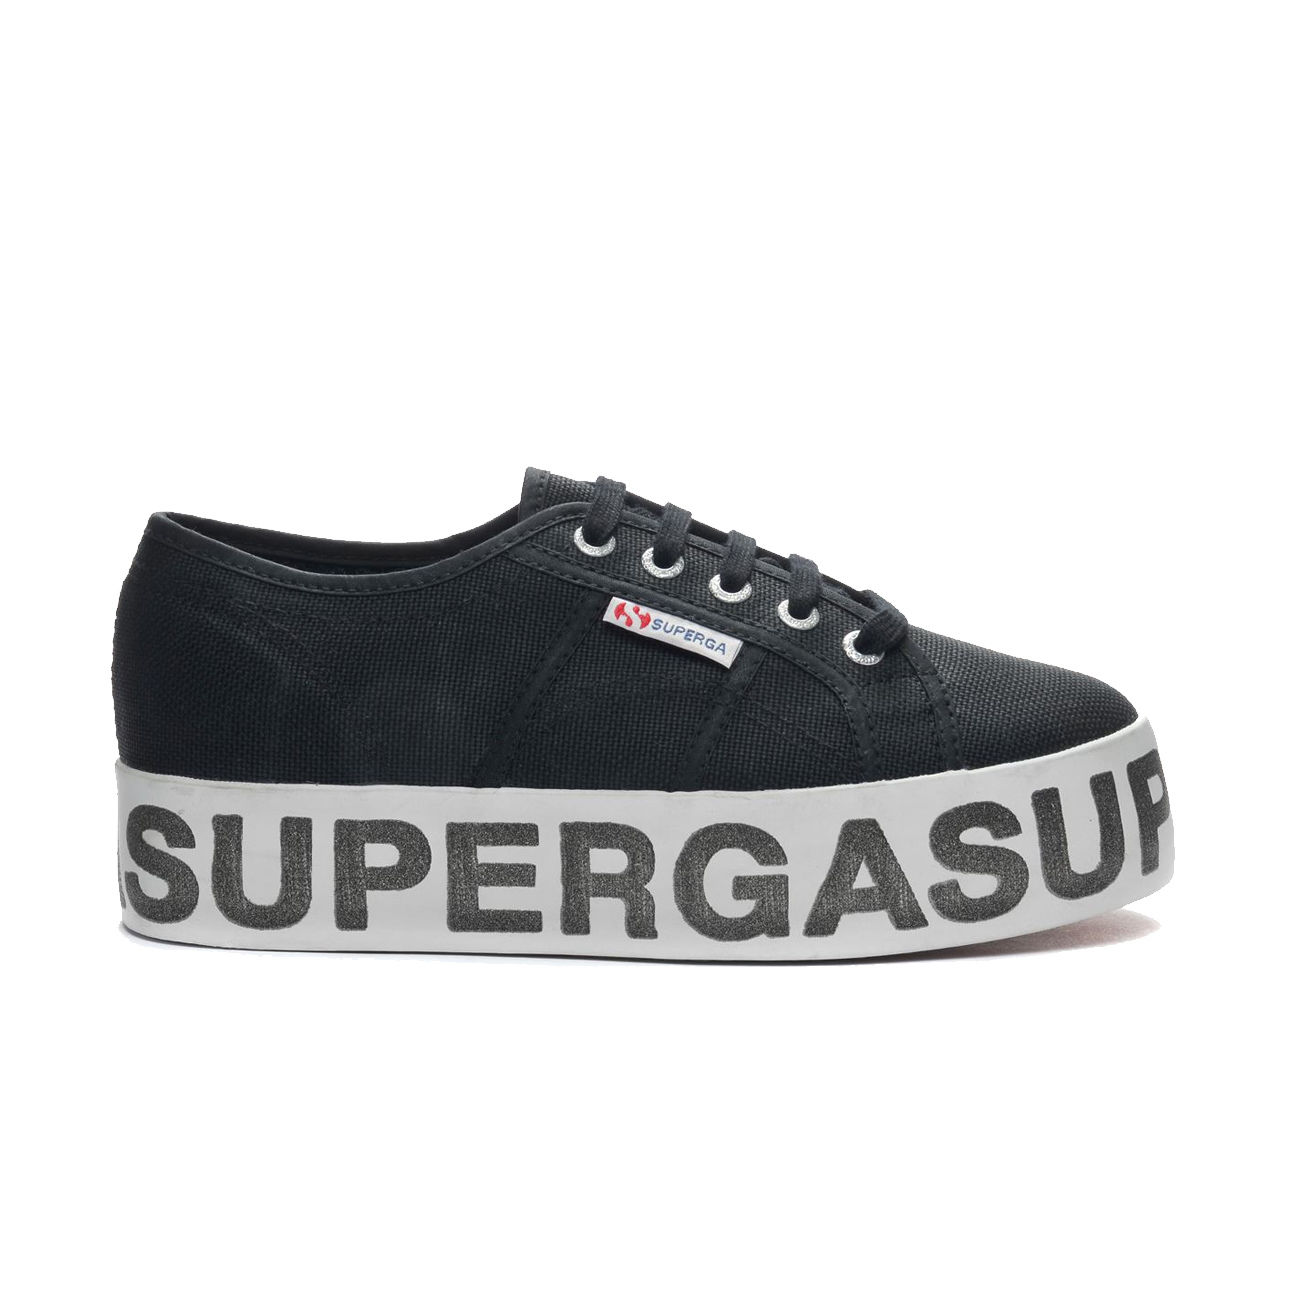 Superga Womens Shoes Sneakers with Platform S00FJ80 999 2790 COTU Outsole Lettering